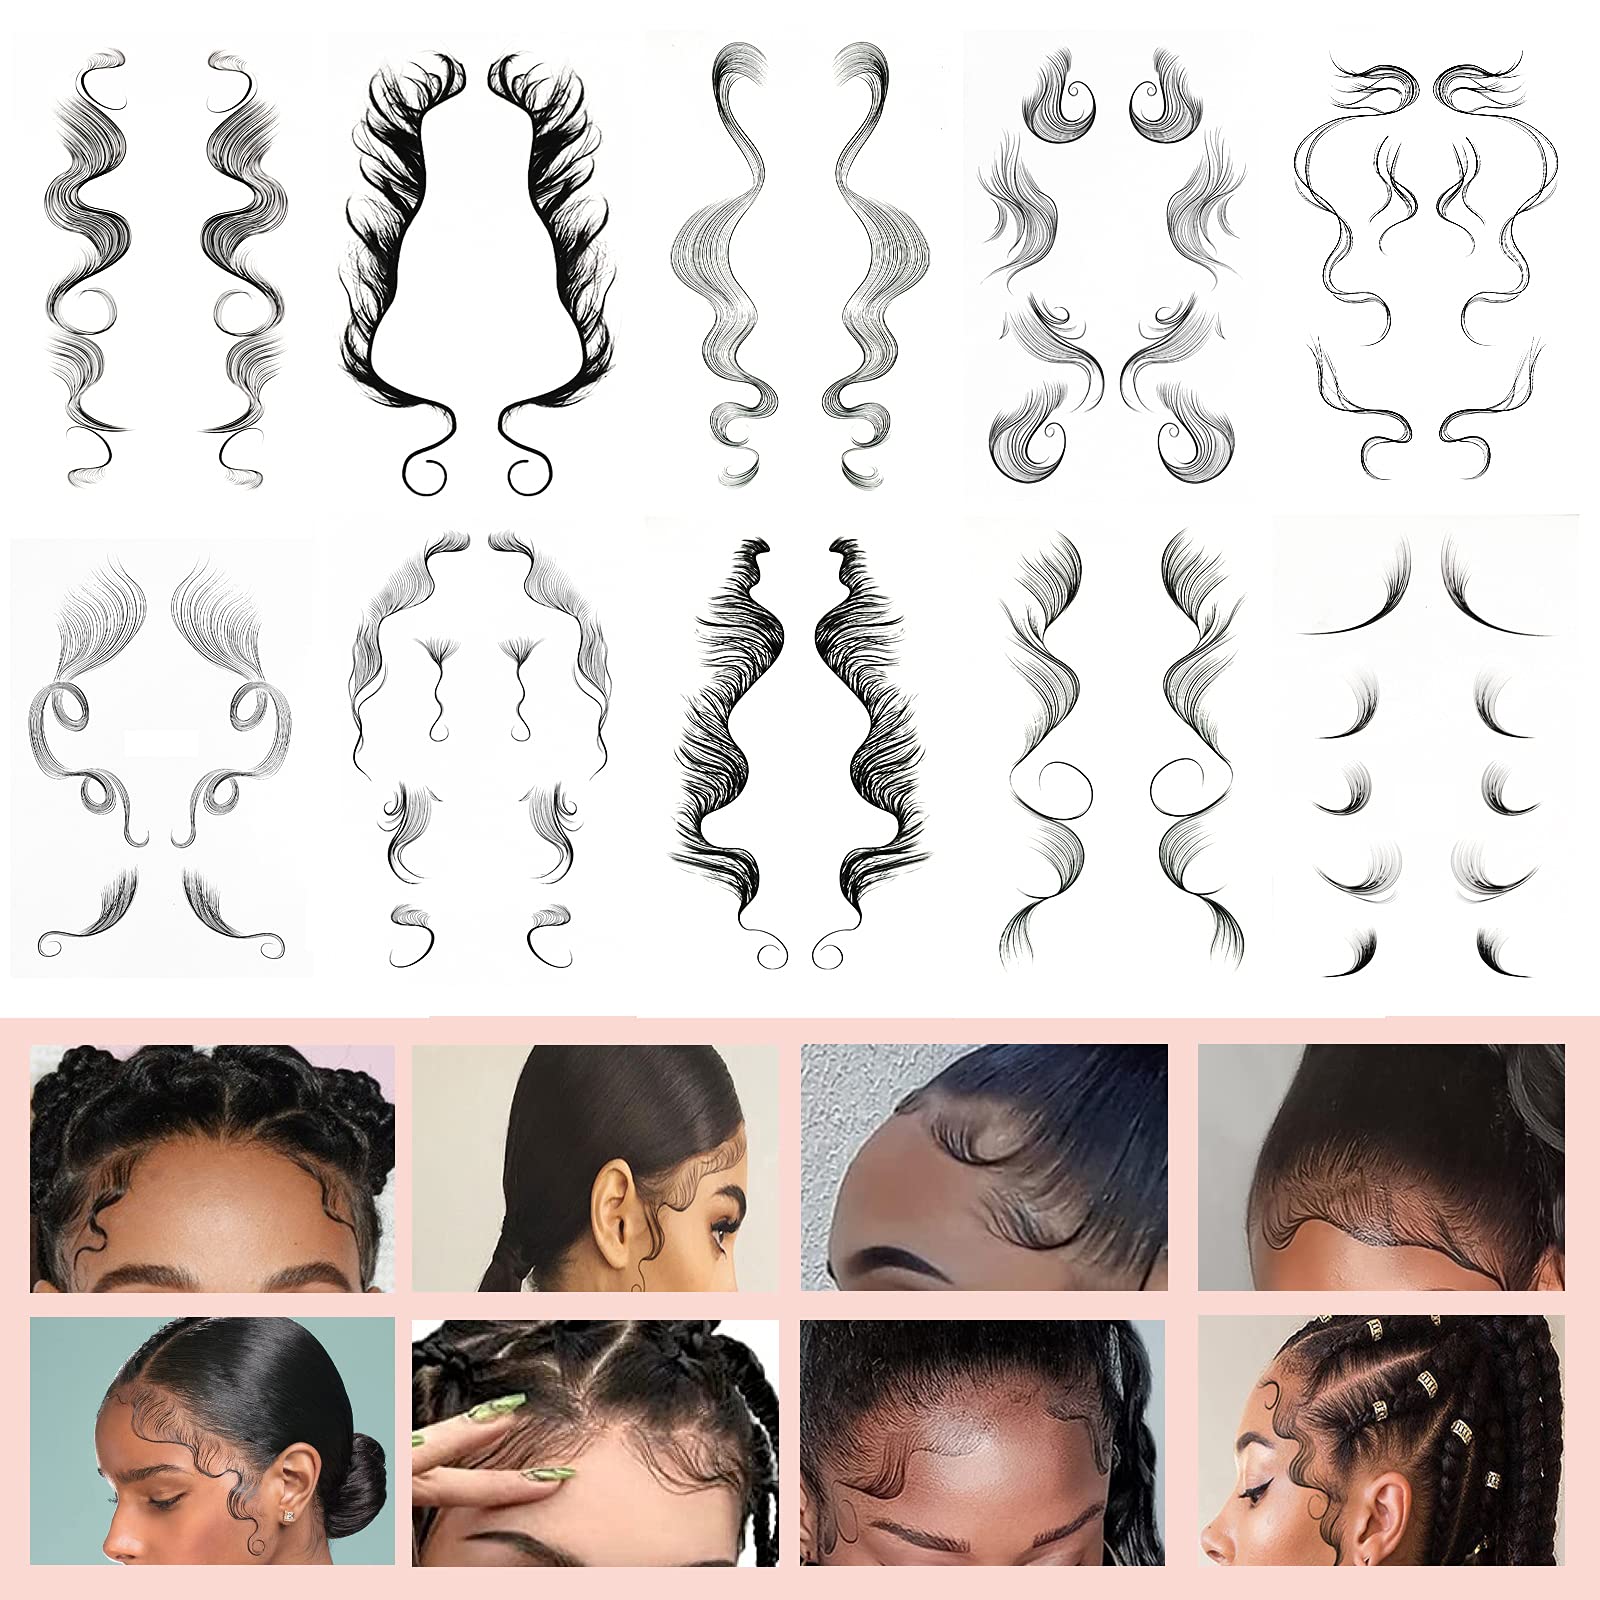  8 Styles Baby Hair Tattoo Stickers，Tattoo Baby Hair Edges,  Waterproof & Lasting Tattoo Edges for Women Girl, Fake Edges Curly Hair  Salon DIY Hairstyling Hair Stickers, Template Makeup Tool (8Pcs) 